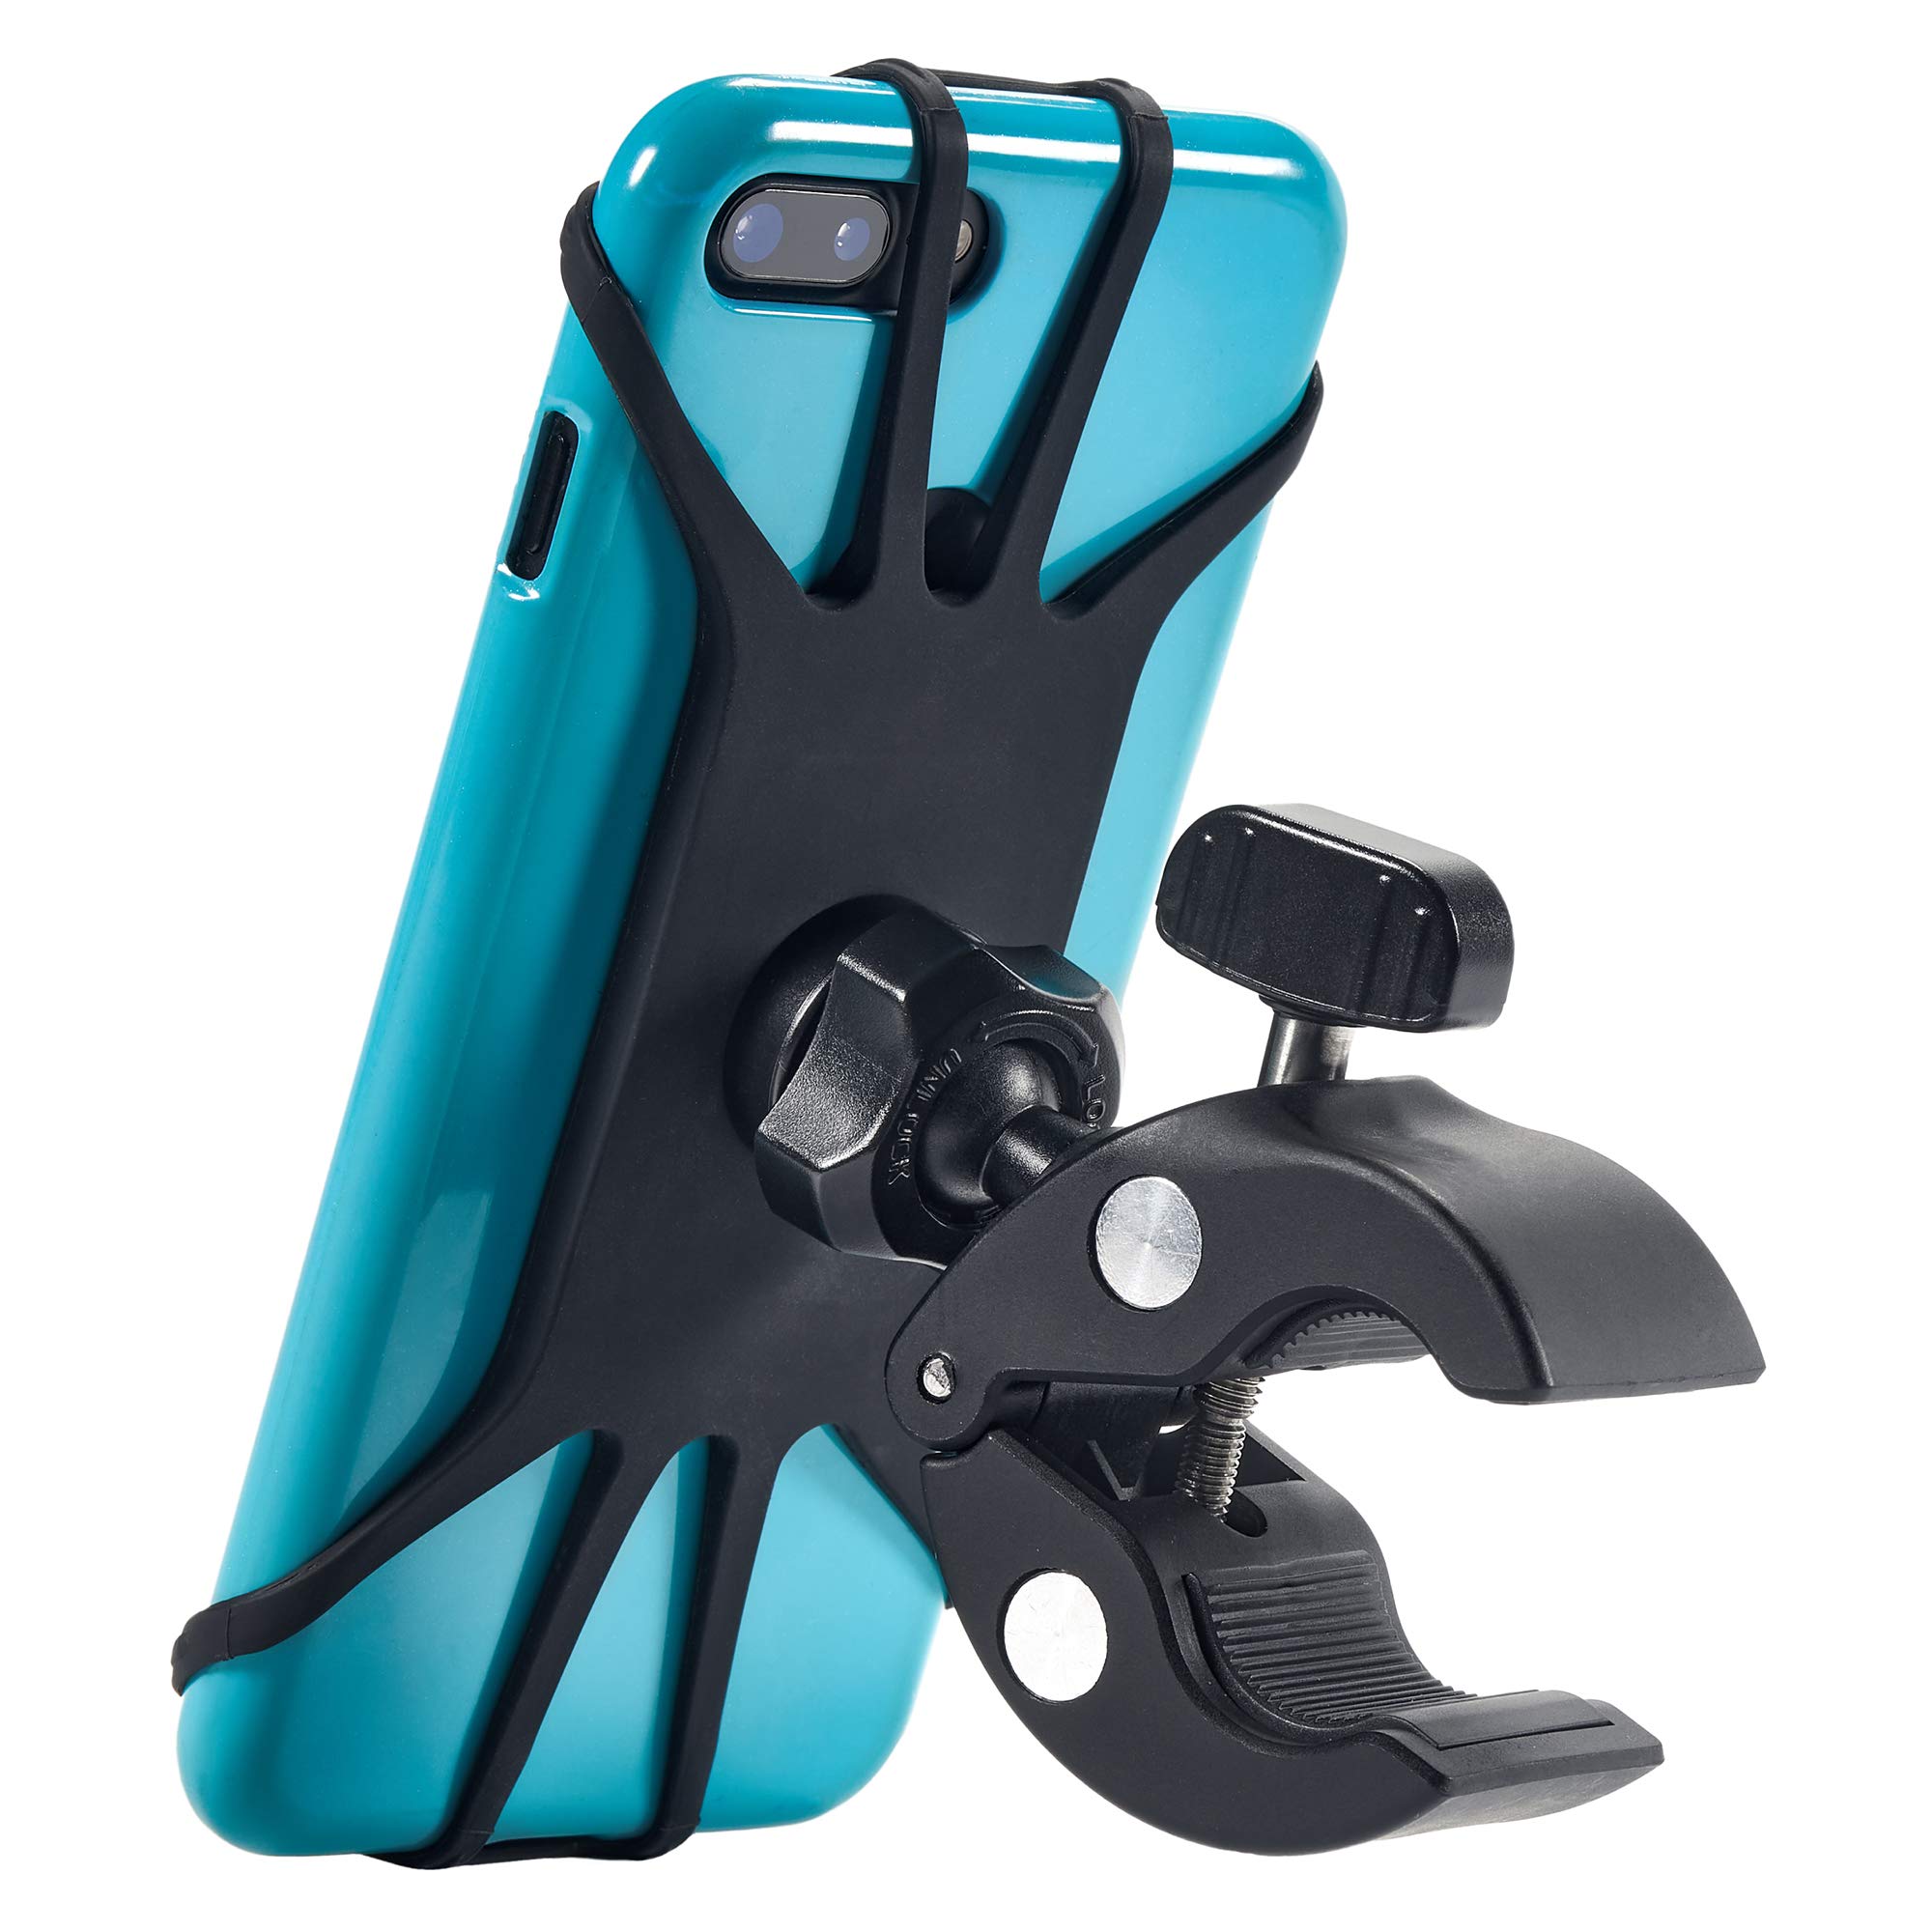 Upgraded 2023 Bicycle & Motorcycle Phone Mount - The Most Secure & Reliable Bike Phone Holder for iPhone, Samsung or Any Smartphone. Stress-Resistant & Highly Adjustable. x10 to Safeness & Comfort